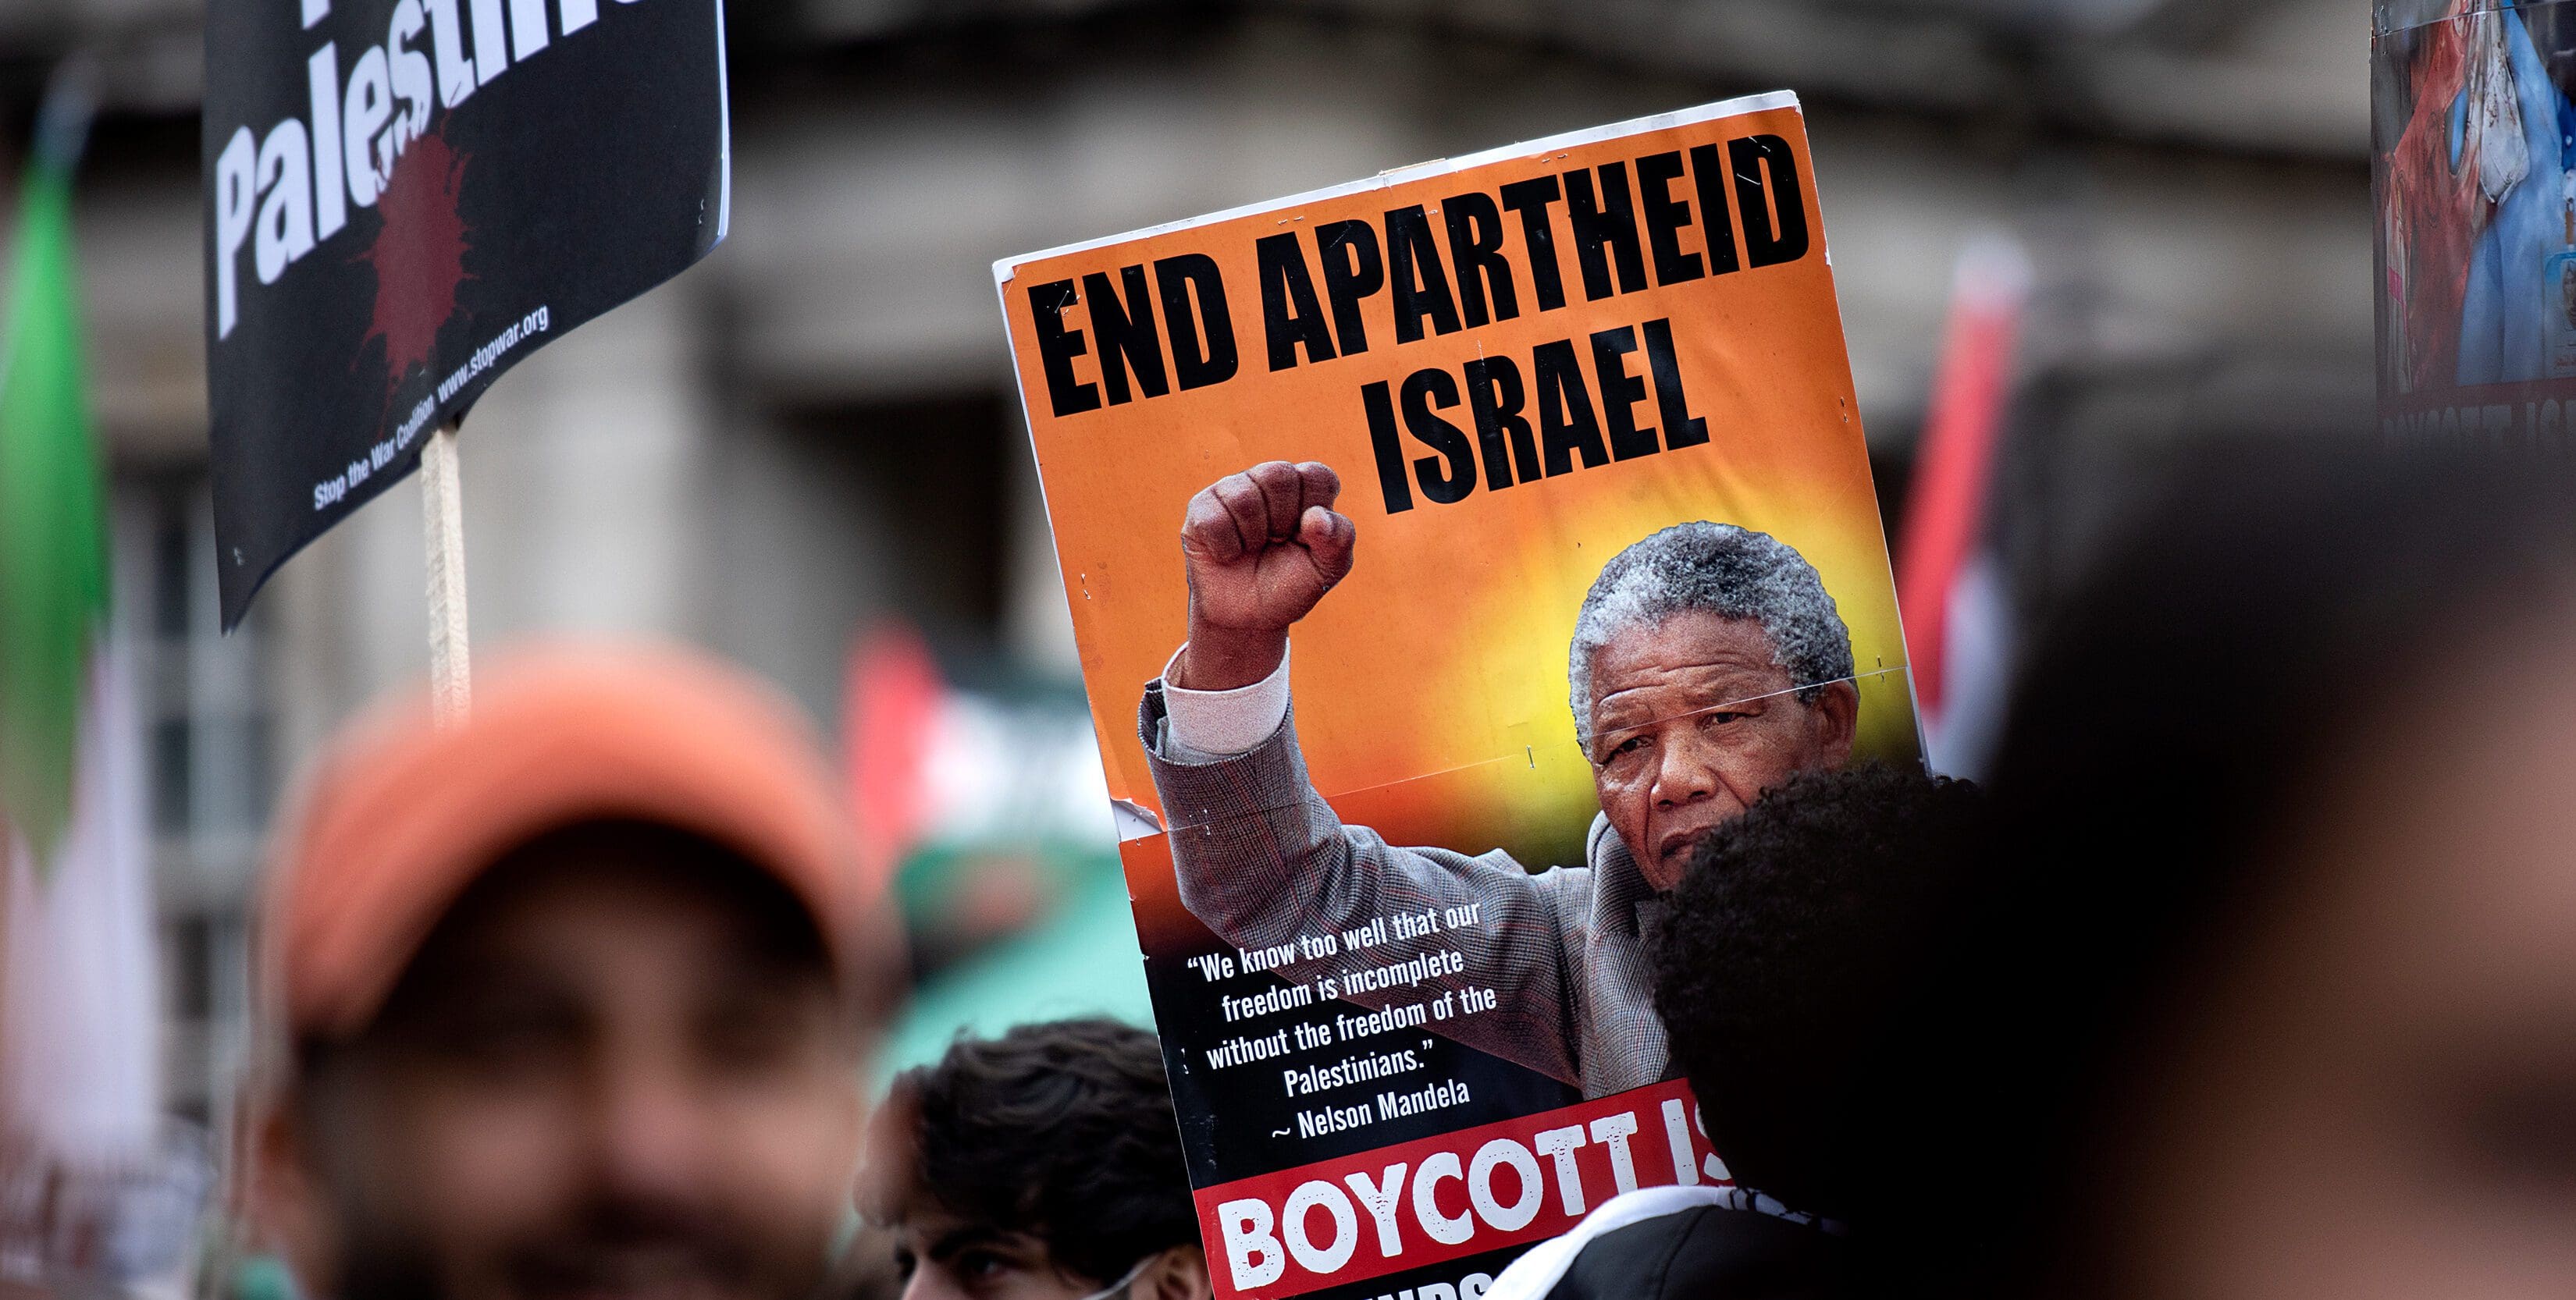 TO THE FAR RIGHT OF APARTHEID - The New York Times